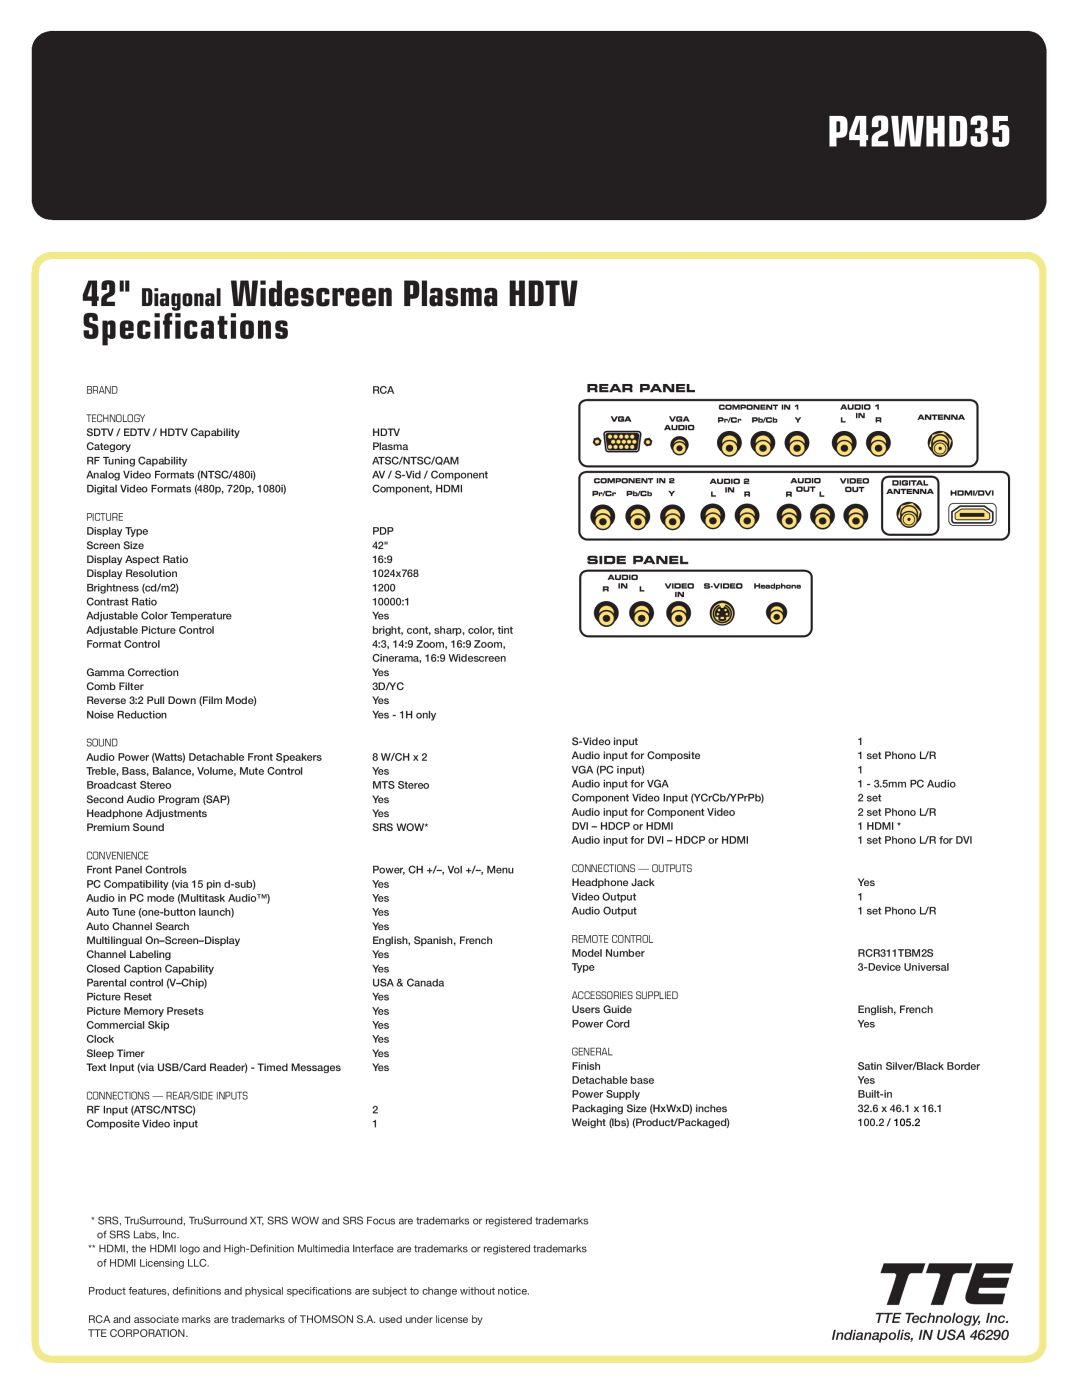 RCA P42WHD35 manual Diagonal Widescreen Plasma HDTV Specifications, TTE Technology, Inc. Indianapolis, IN USA 